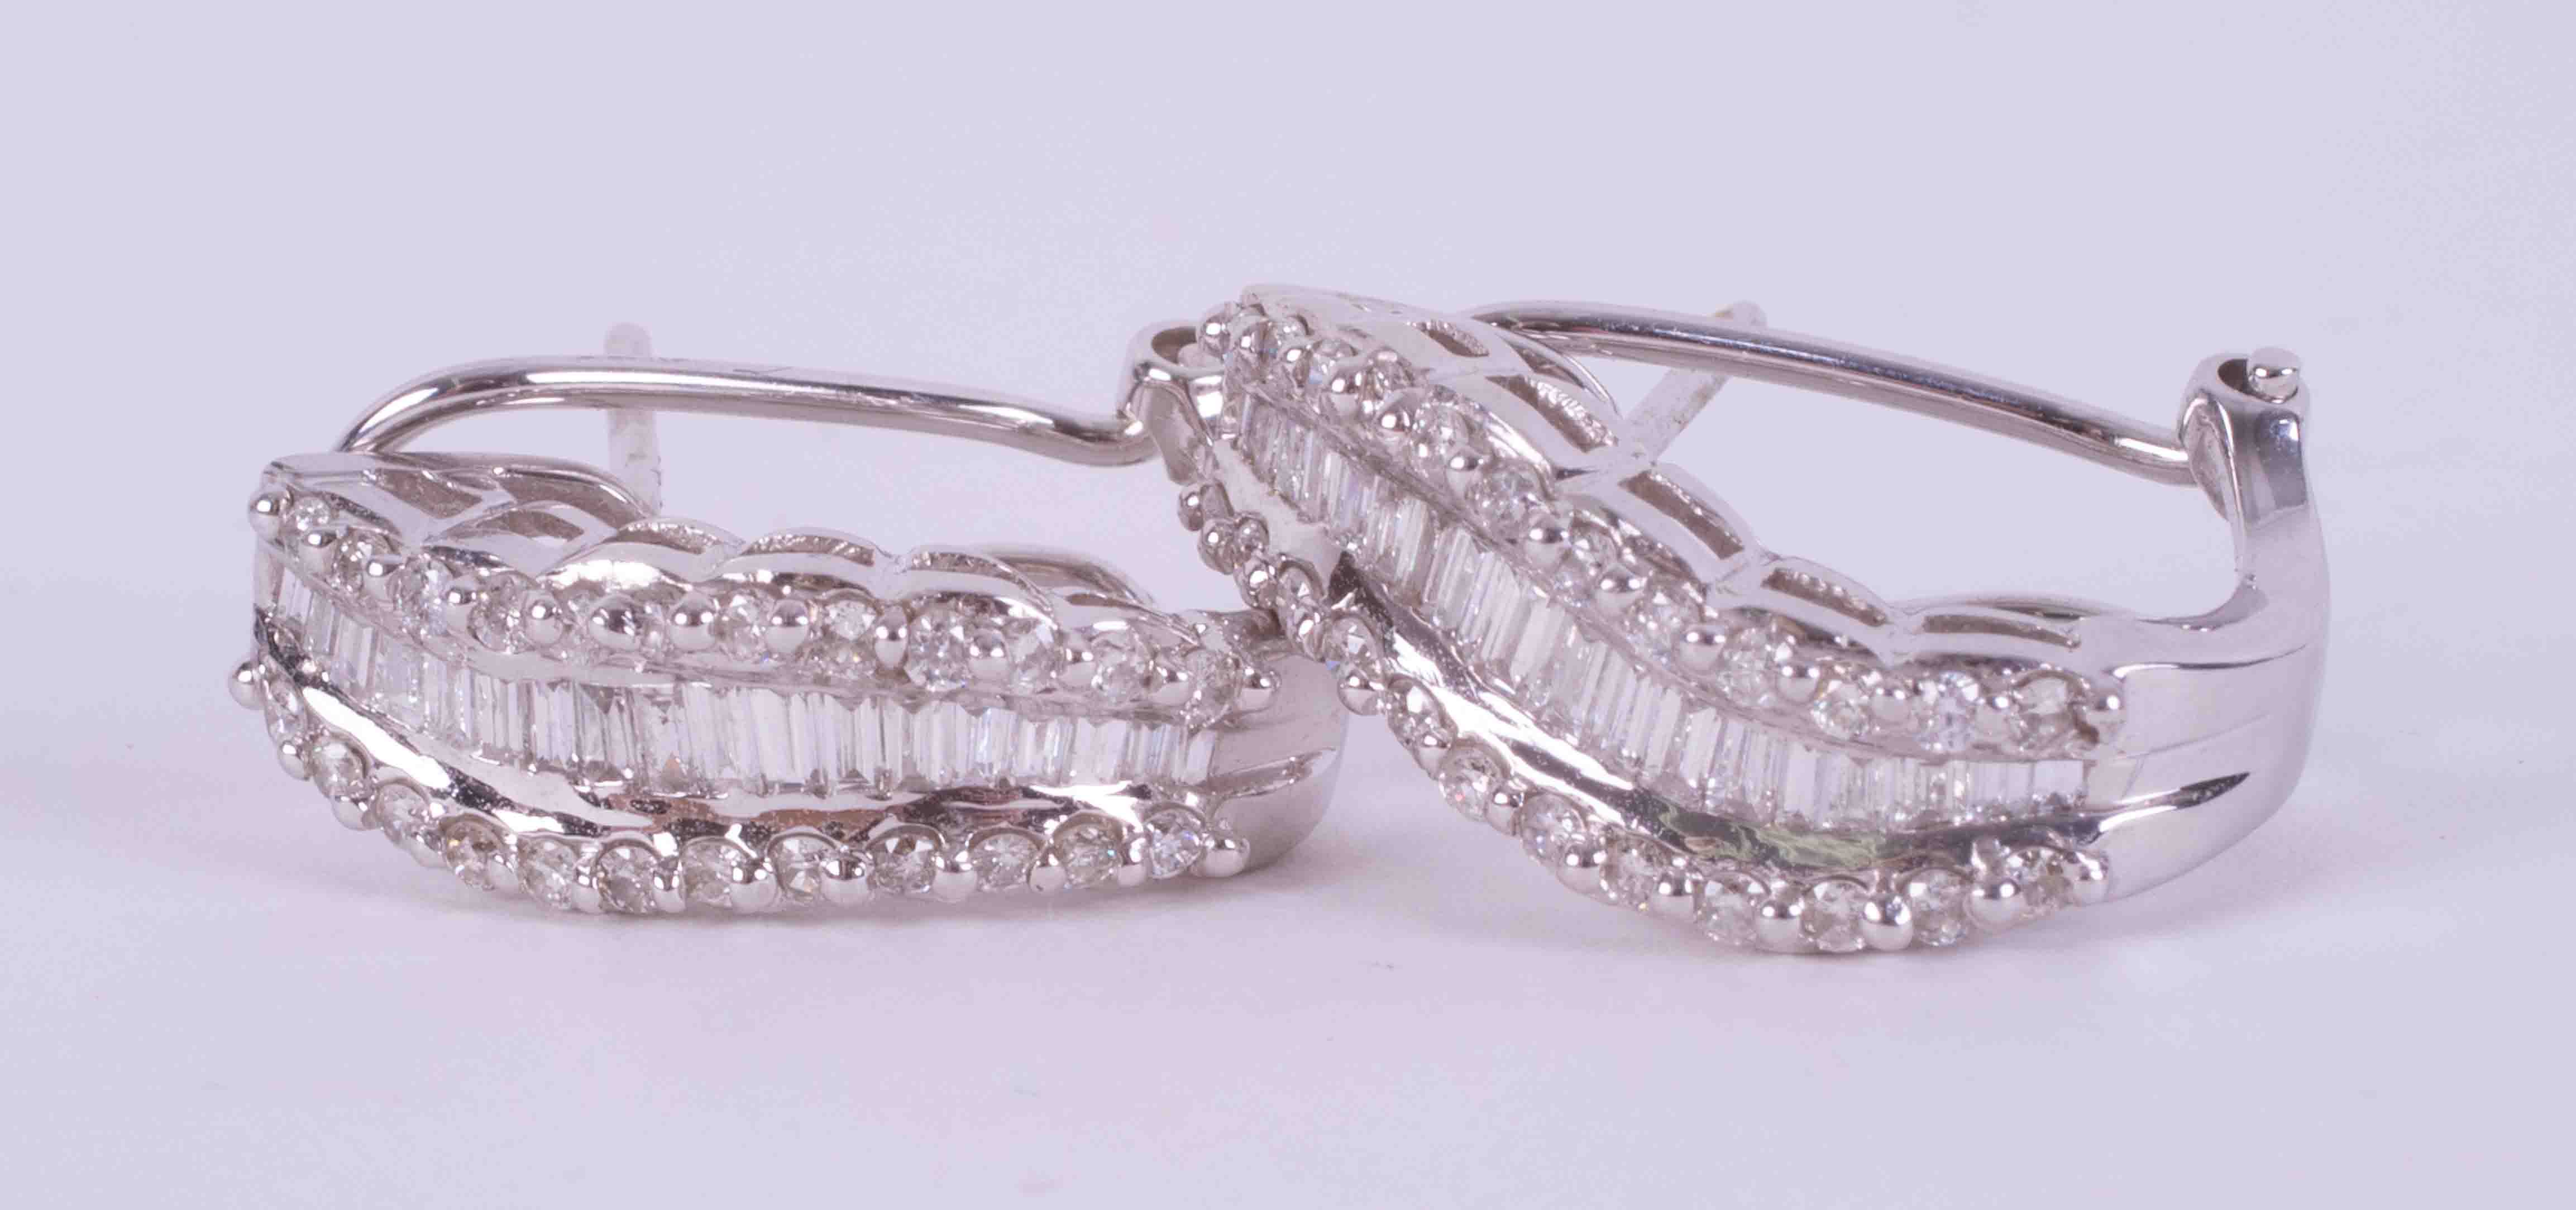 A pair of 18ct white gold wave design earrings set with approx. 1.34 carats total weight of baguette